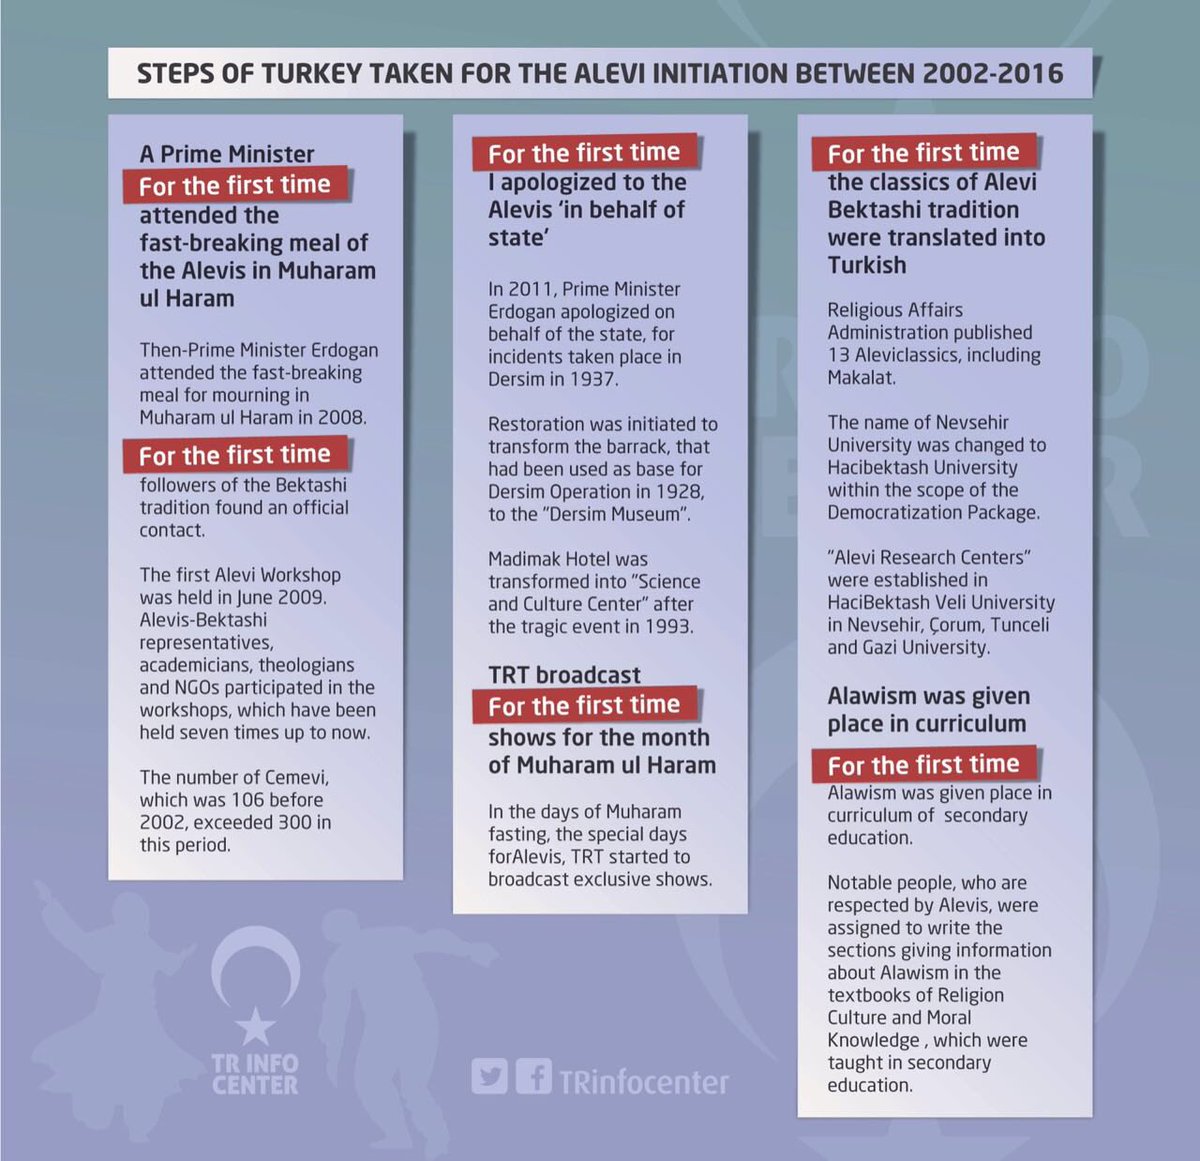 Steps of Turkey taken for the Alevi initiation between 2002 - 2016